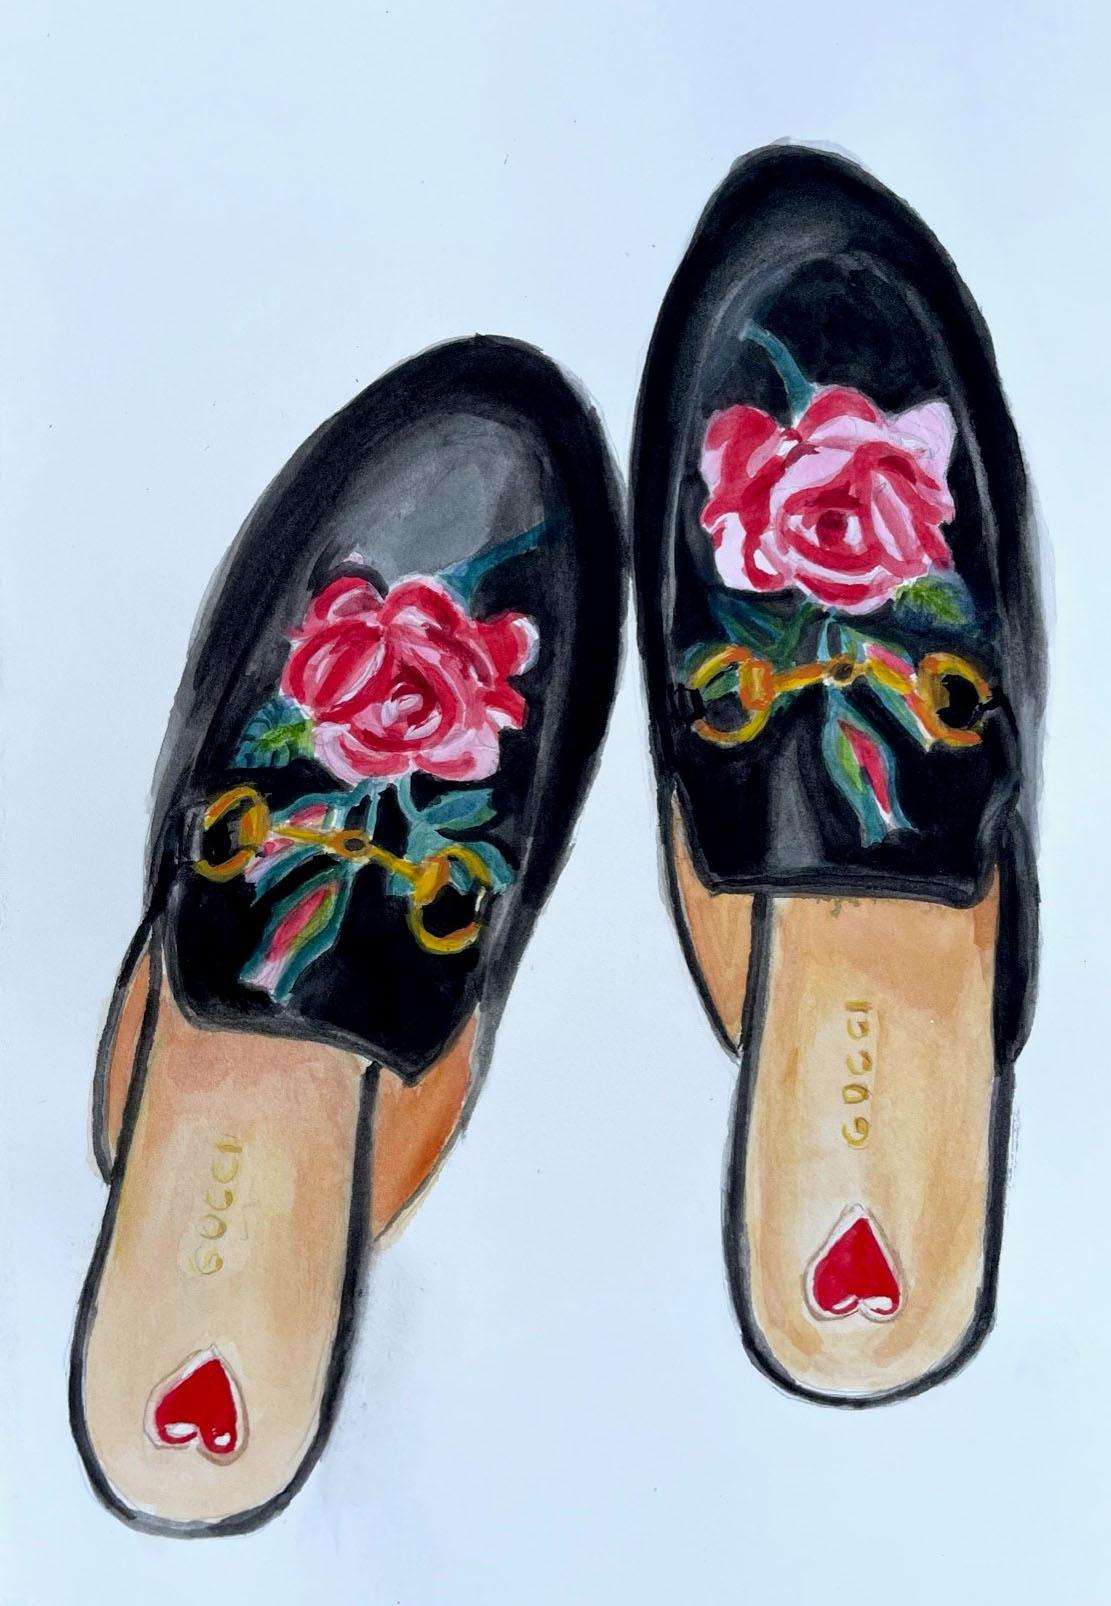 Vintage Gucci Rose Slides Watercolor Painting
Not Framed
Watercolor on 140 lb. Arches Aquarelle hot press watercolor paper.

About the Artist
Christina Ruggieri grew up between Manhattan and Eastern Long island. Aside from a few watercolor workshops